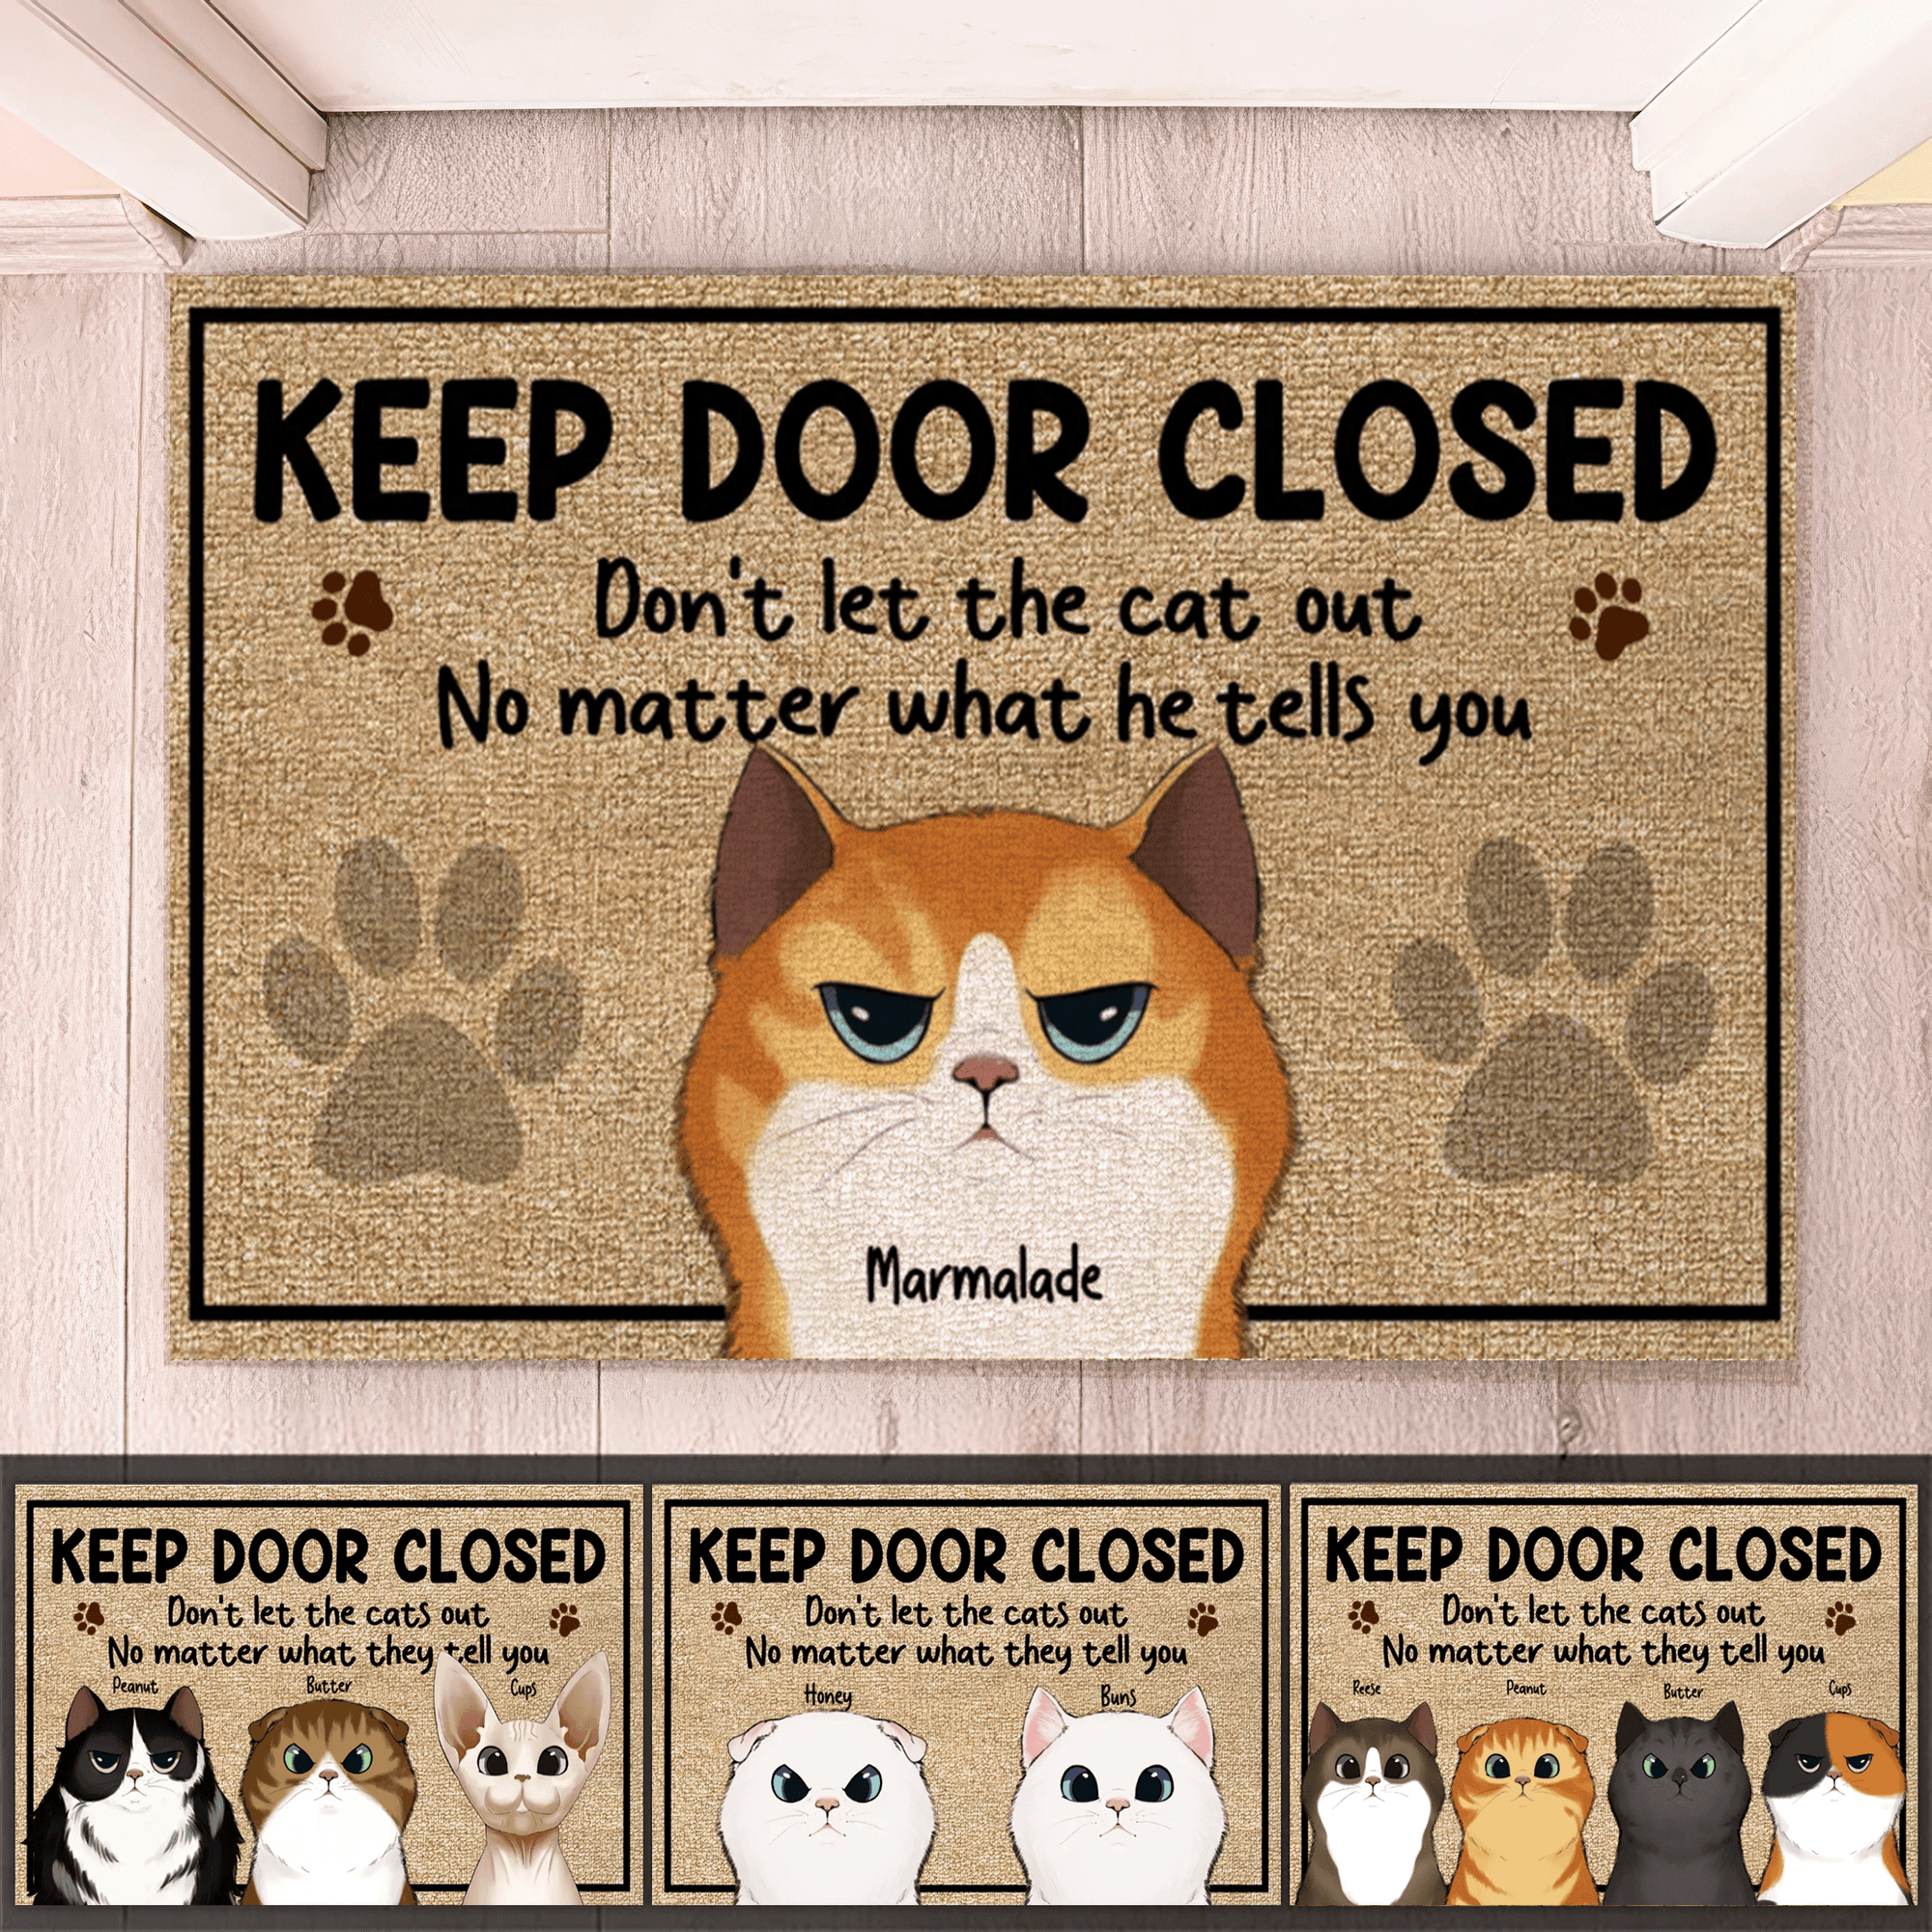 Keep Door Closed No Matter What the Cats Tell You - Personalized Doormat - Birthday, Housewarming, Funny Gift for Homeowners, Friends, Dog Mom, Dog Dad, Dog Lovers, Pet Gifts for Him, Her